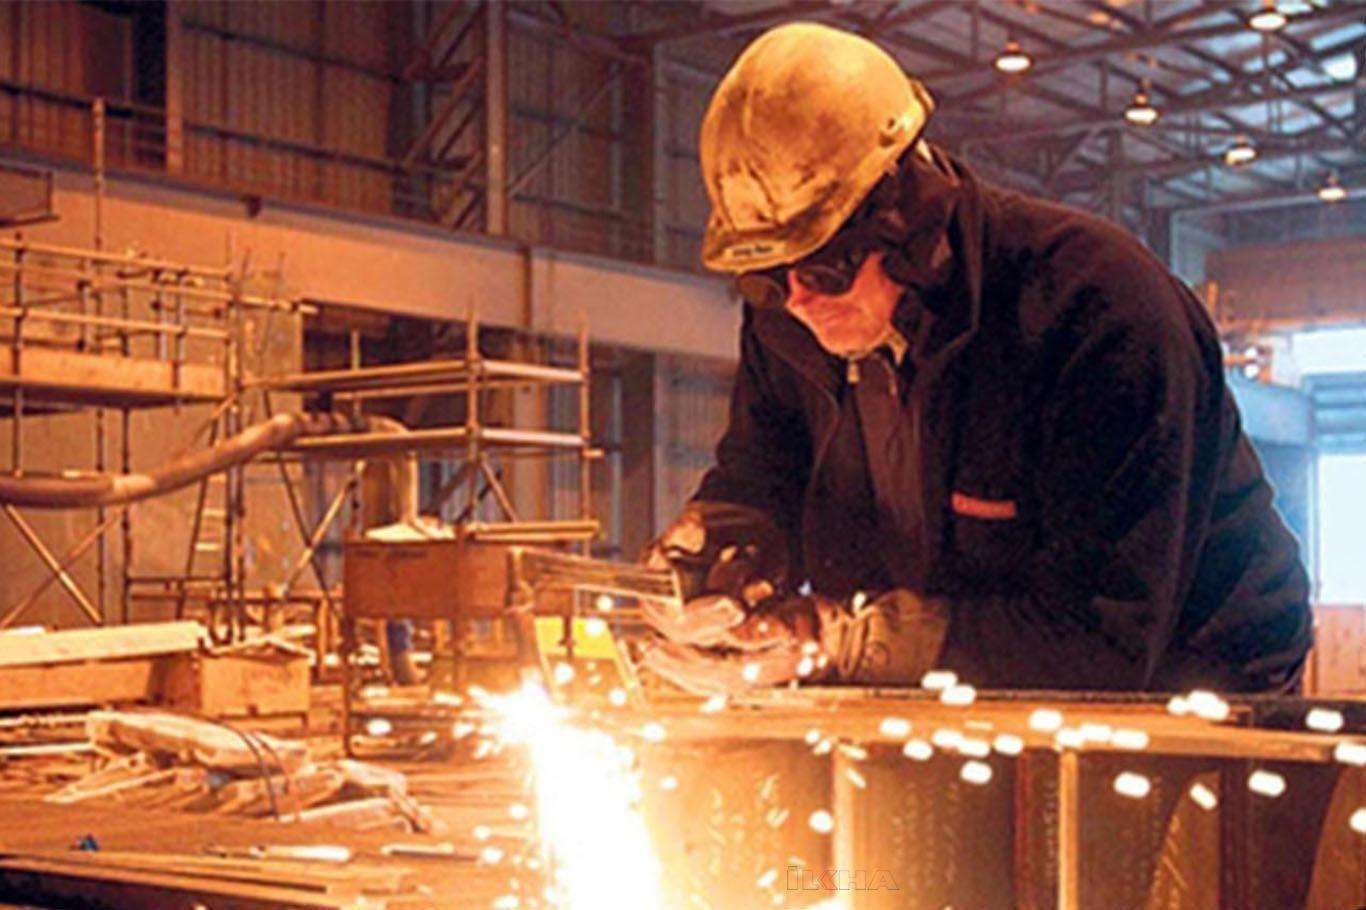 Türkiye’s industrial production rises by 8.5% annually